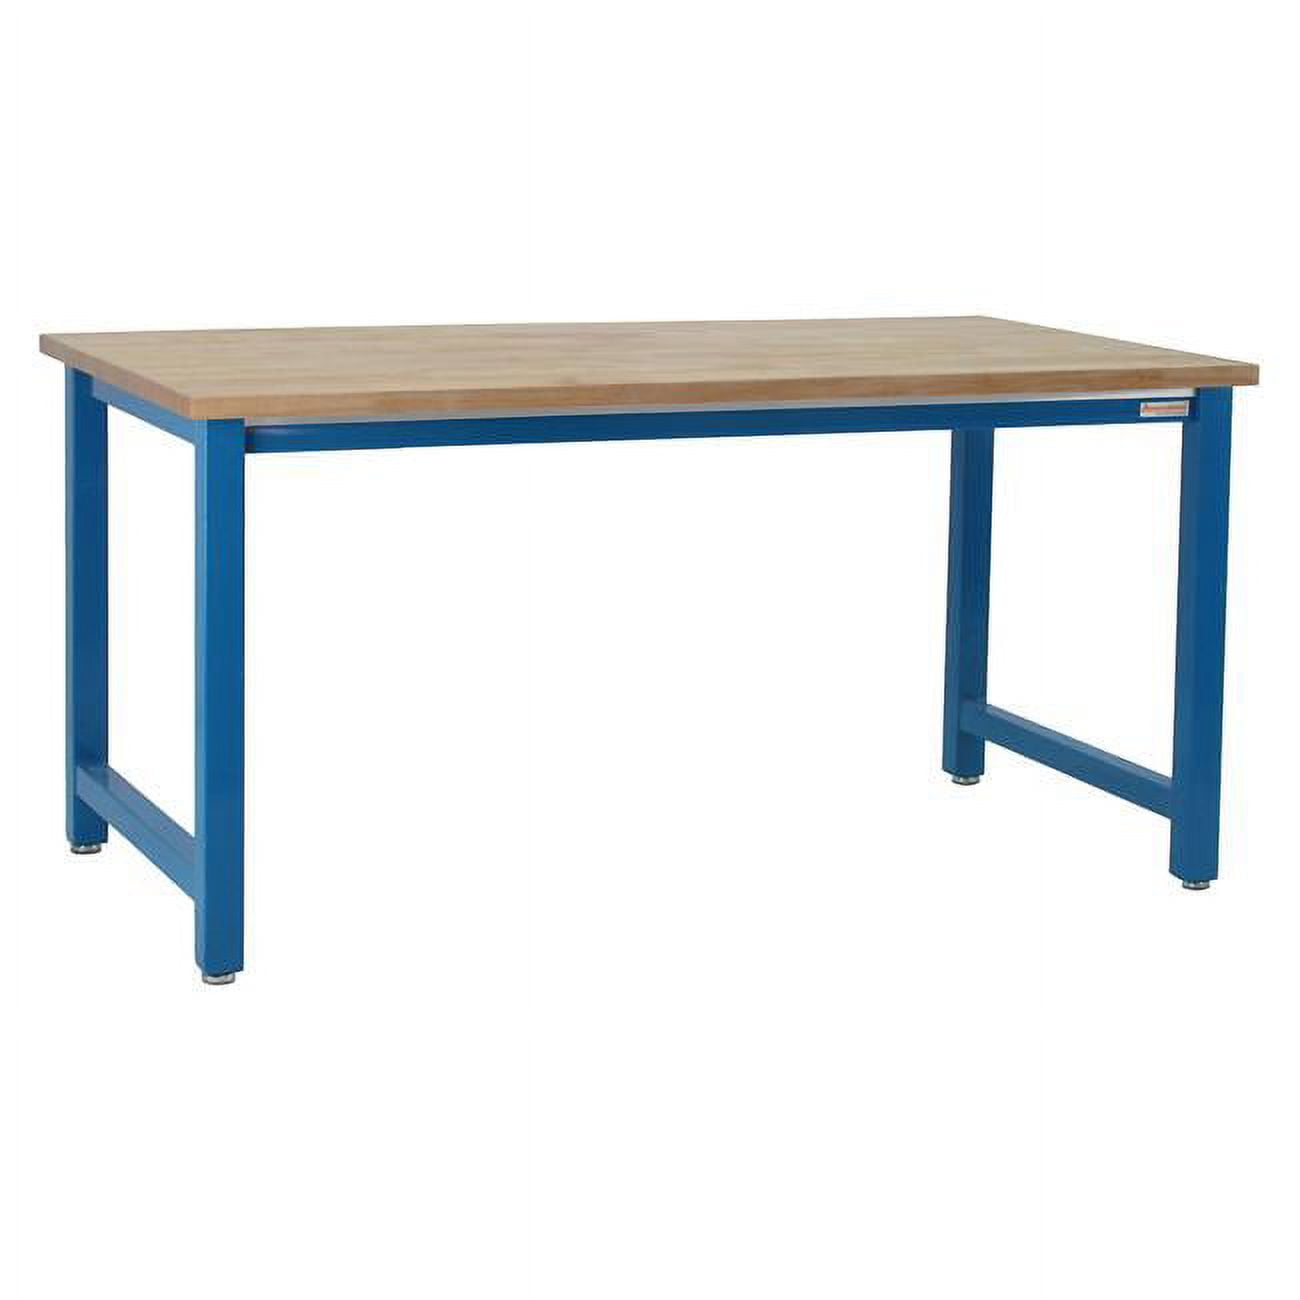 BenchPro KW3696-LBFr34 36 x 96 in. Kennedy Workbenches with Solid 1.75 in. Thick Maple Butcher Block Top, Light Blue